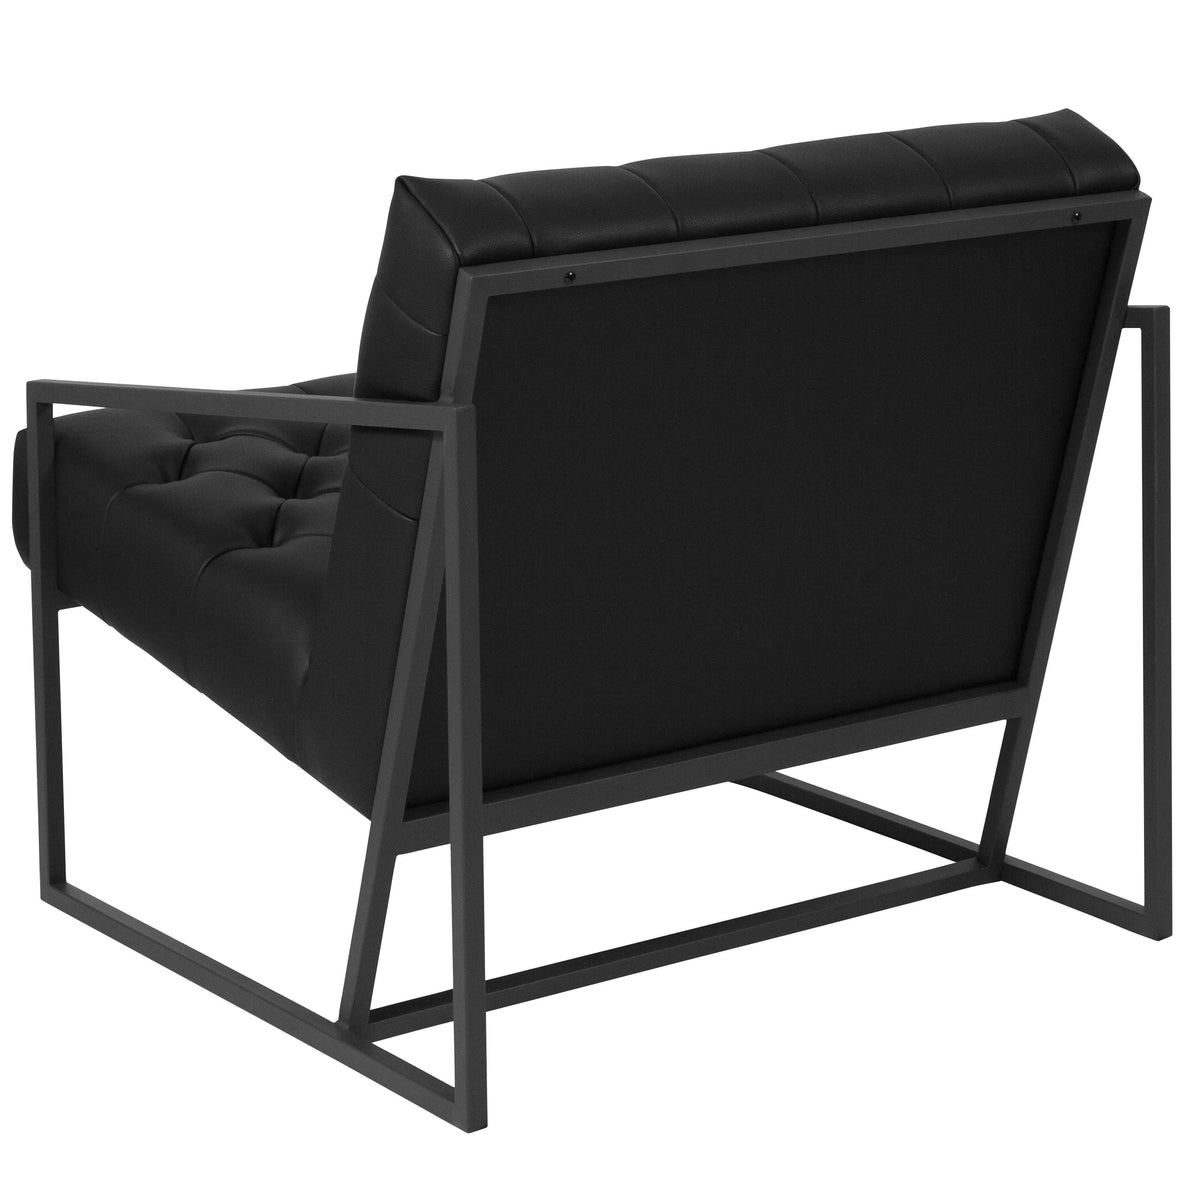 Black |#| Black LeatherSoft Tufted Lounge Chair with Integrated Frame & Slanted Arms